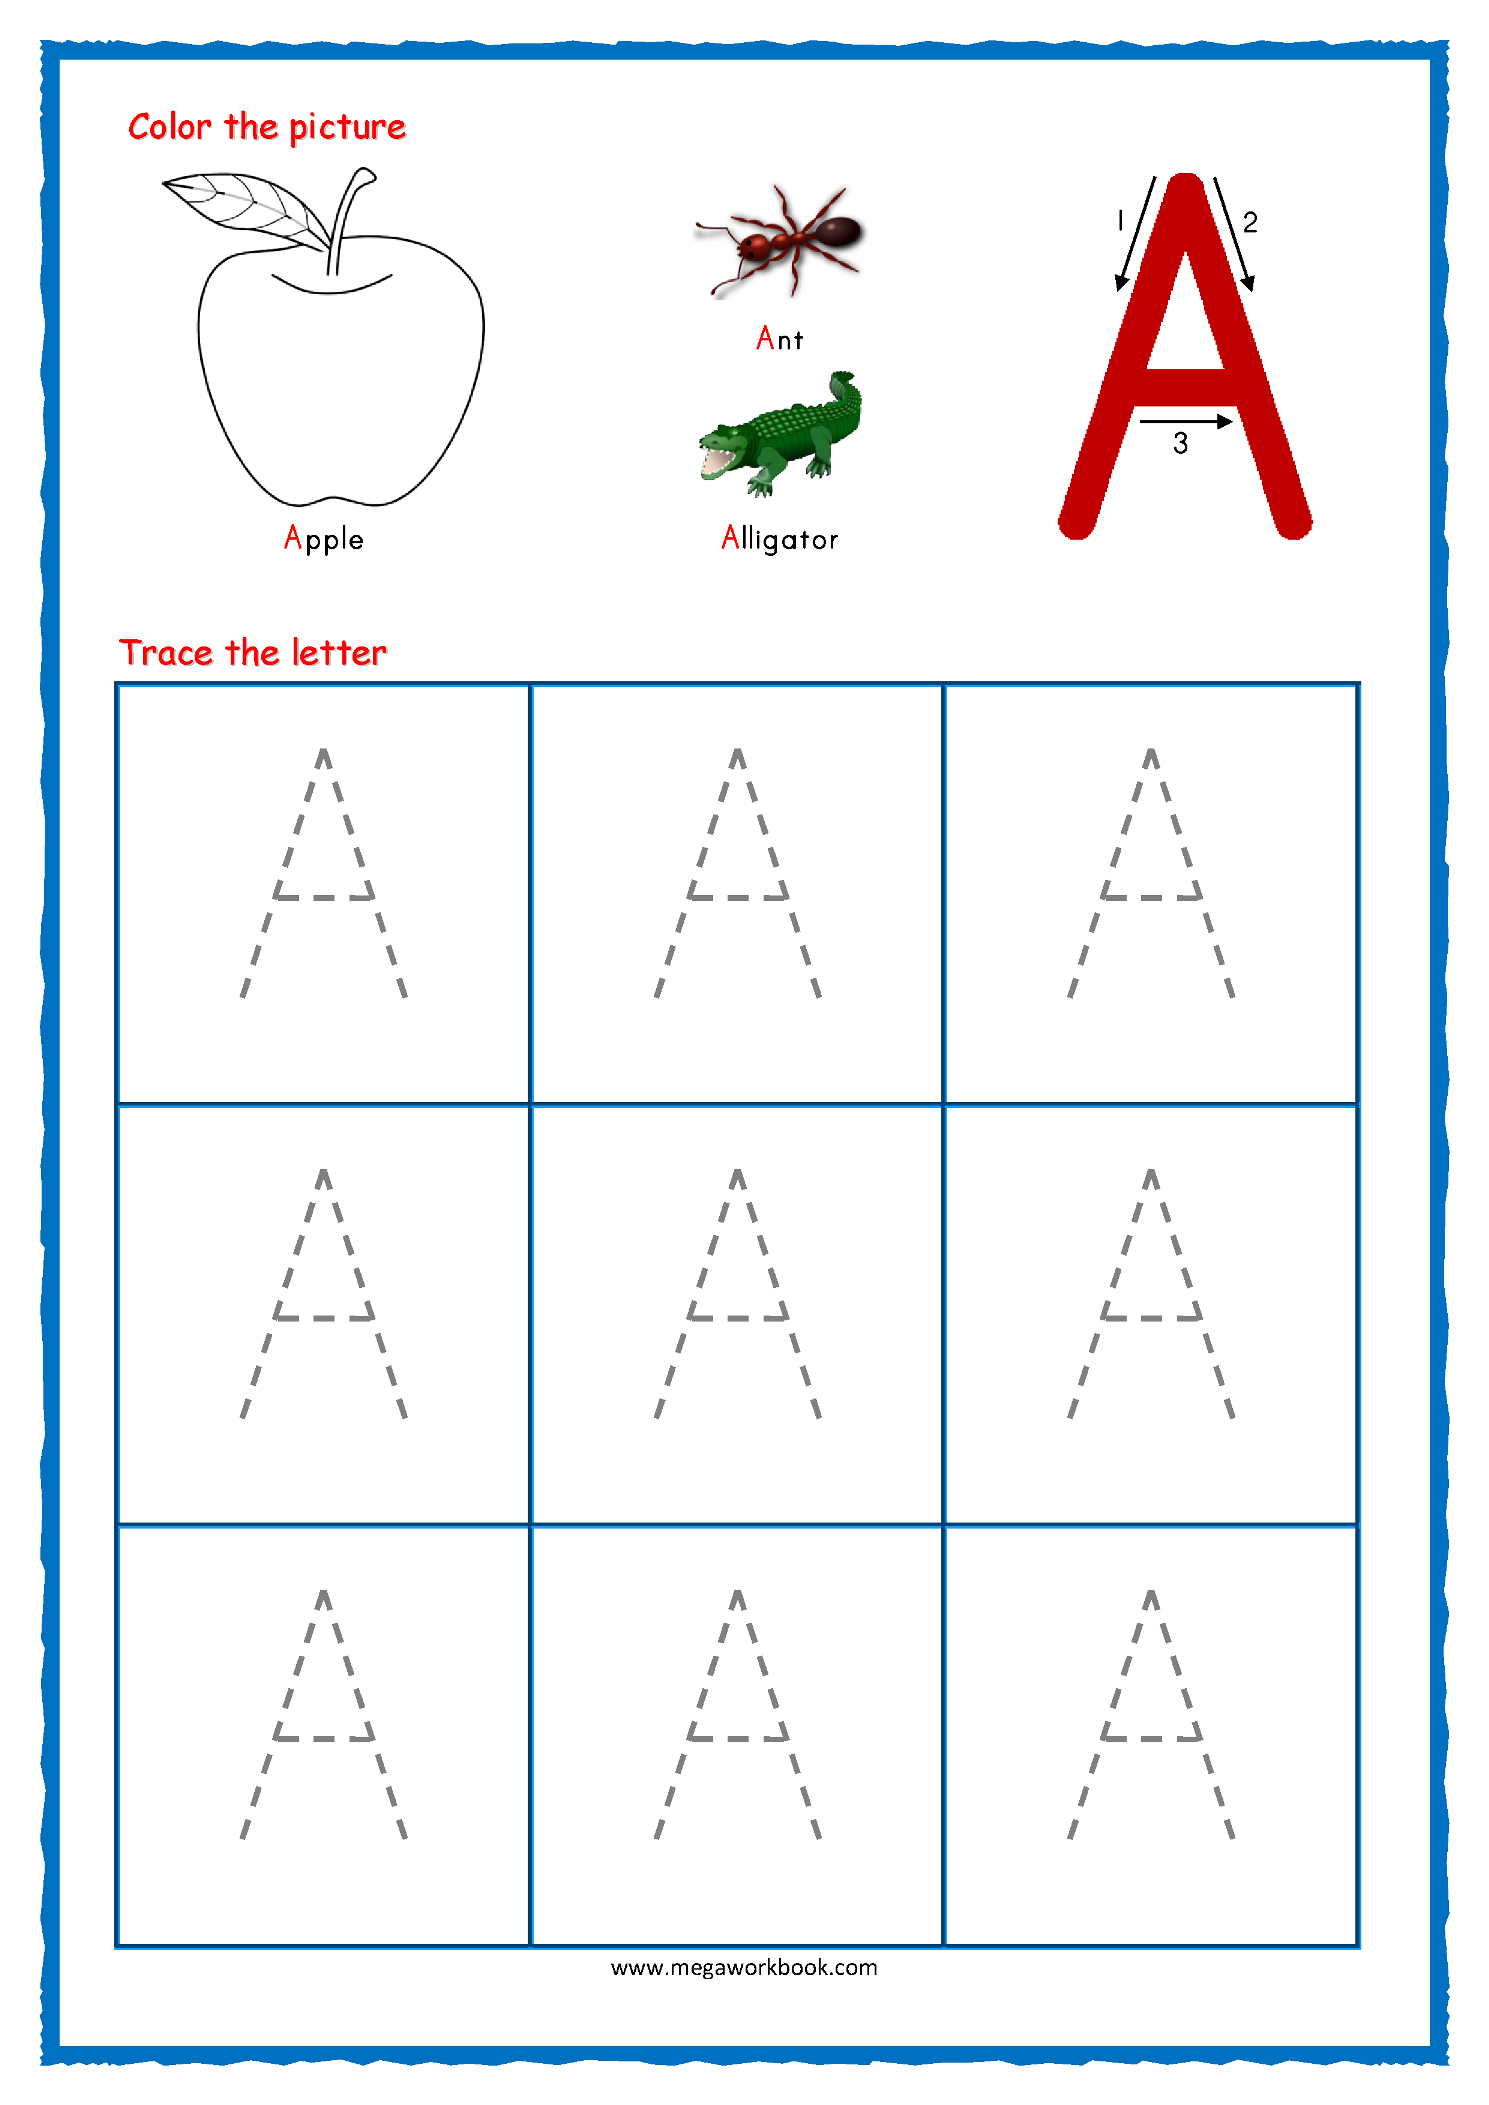 Coloring Book : Coloring Book Alphabet Tracing Worksheets with regard to Tracing Letter A Worksheets For Kindergarten